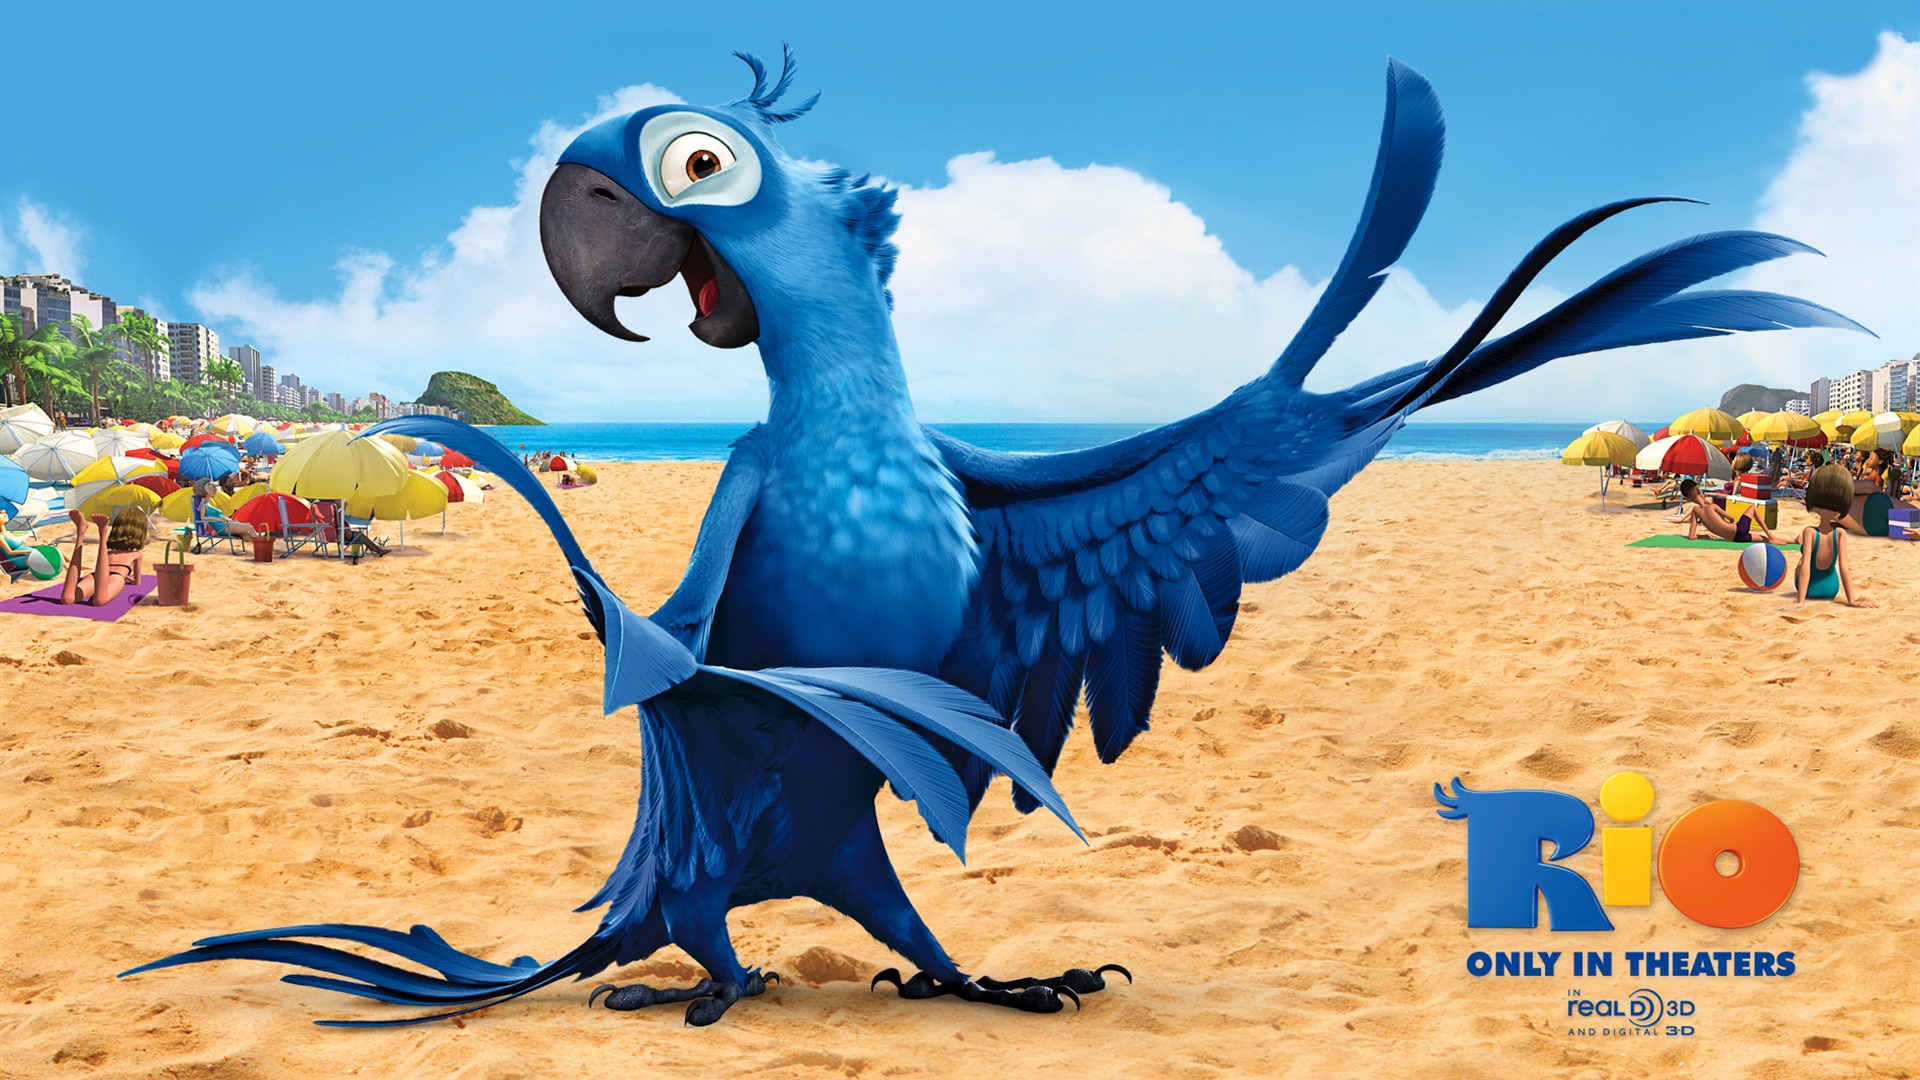 Rio 2011 wallpapers #2 - 1920x1080